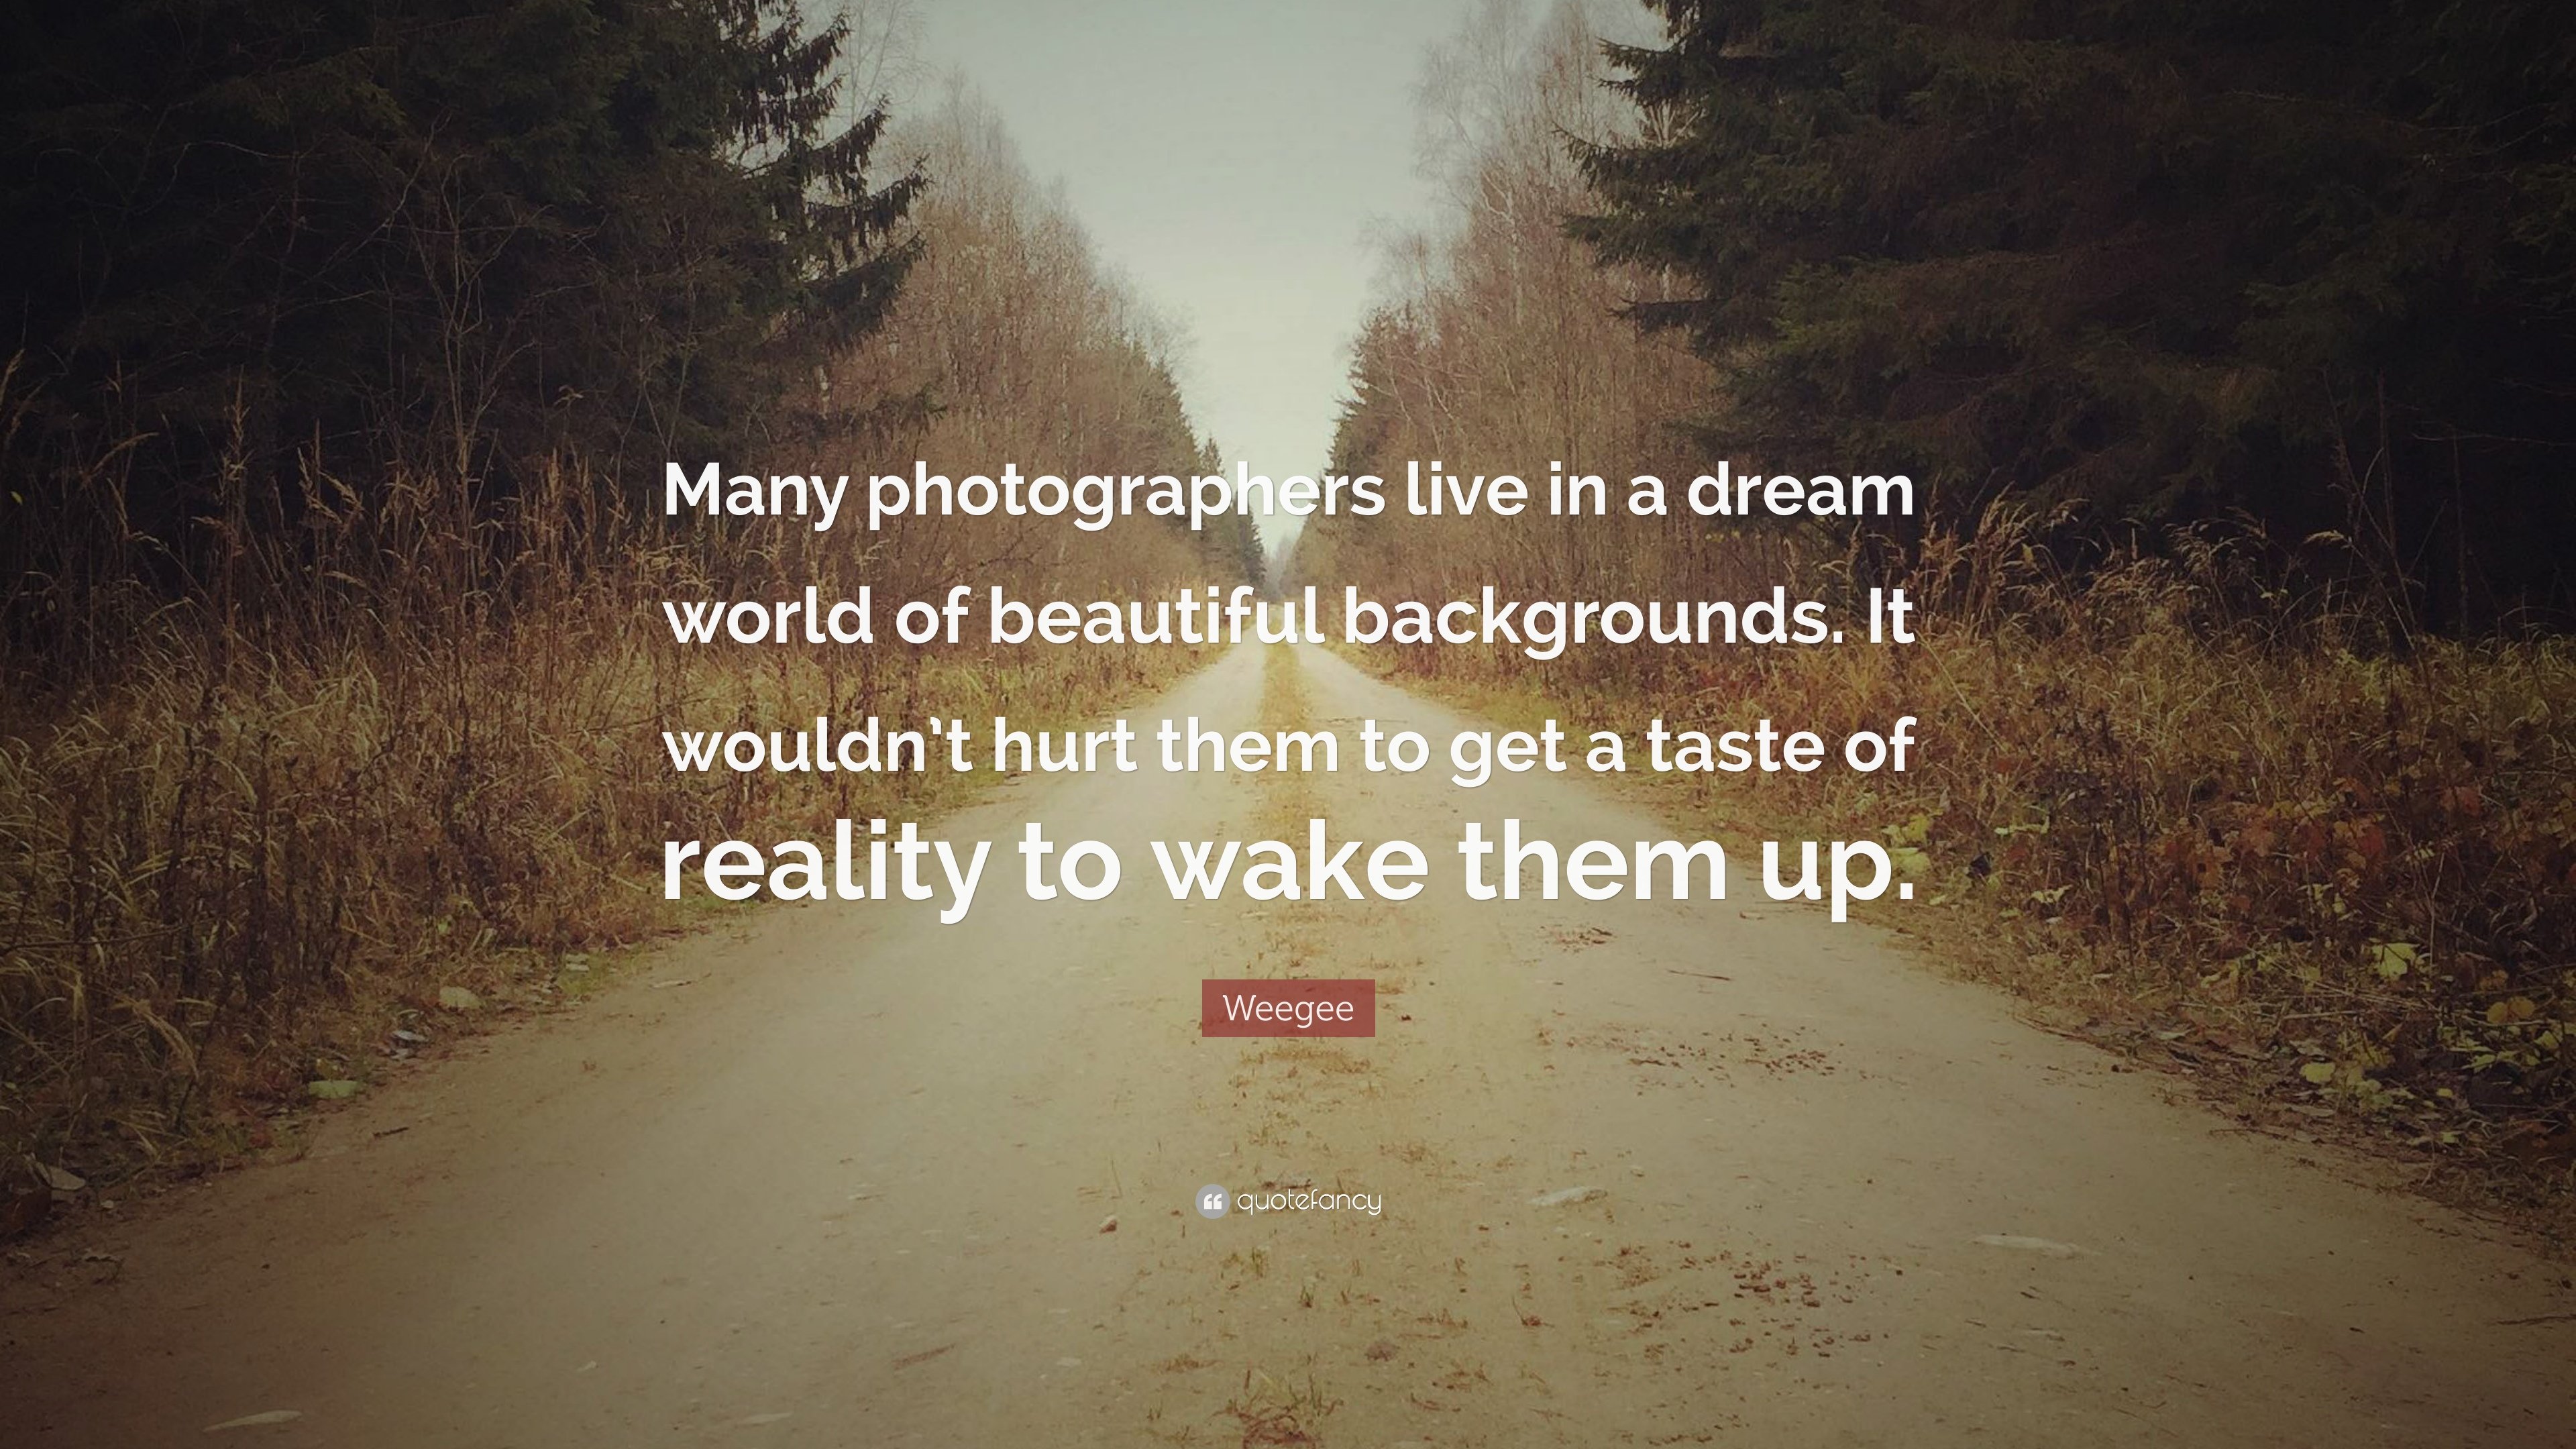 Weegee Quote: “Many photographers live in a dream world